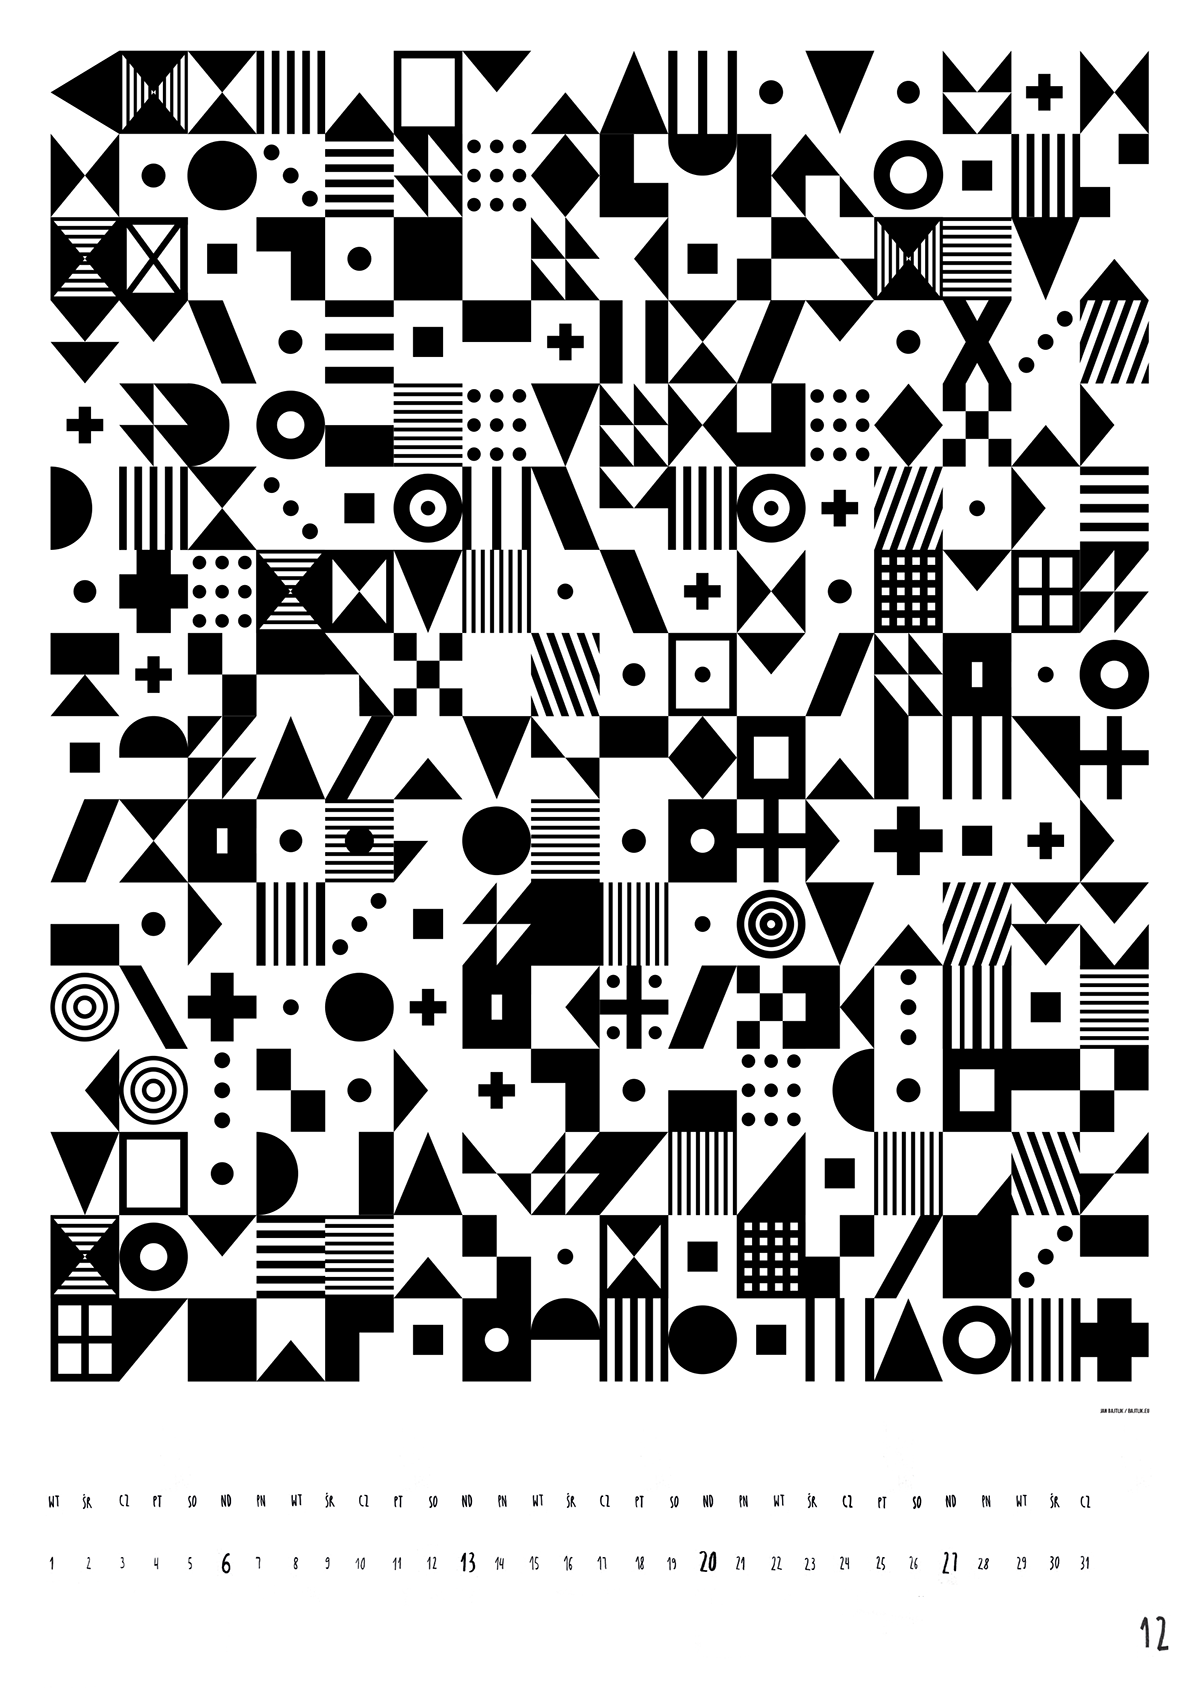 wall calendar Collaboration abstract pattern b&w all year round Fun new year